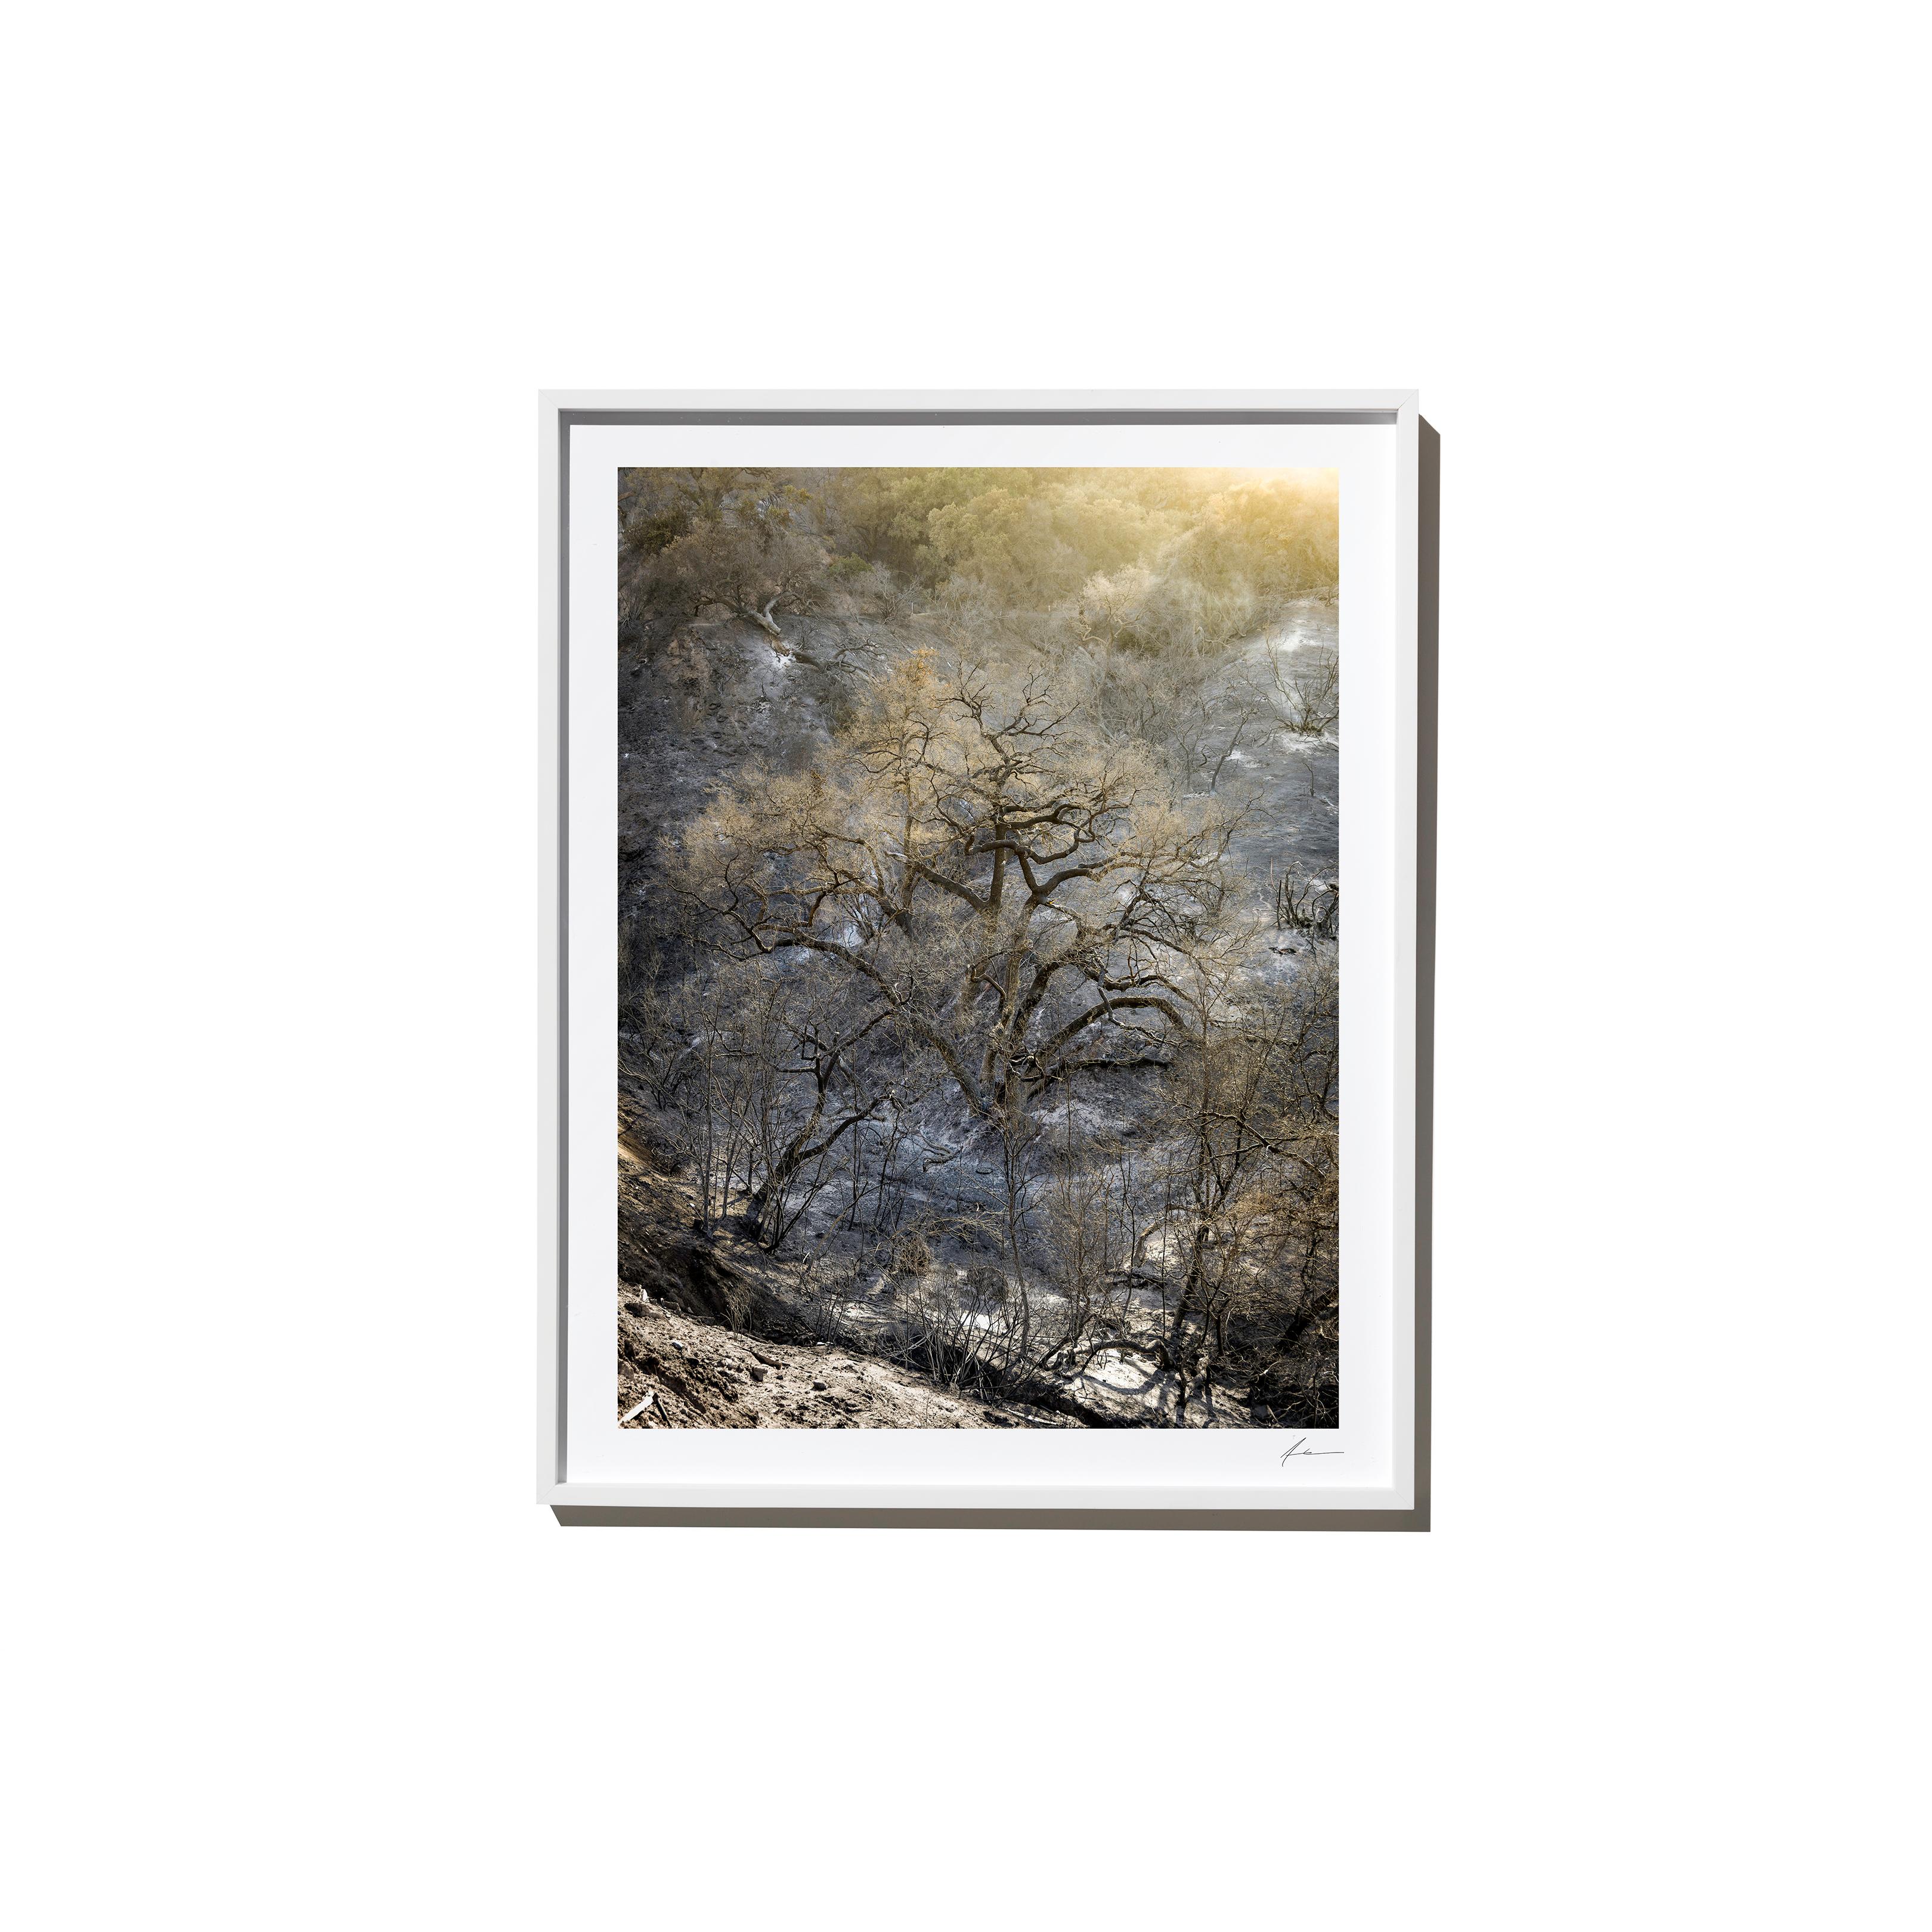 "Dawn" is a framed color landscape photograph by Los Angeles-based photographer Timothy Hogan. 

Frame available in white or black, please specify on order. Please allow 15 days for production before shipping.

Editions and sizes as follows:

Small: